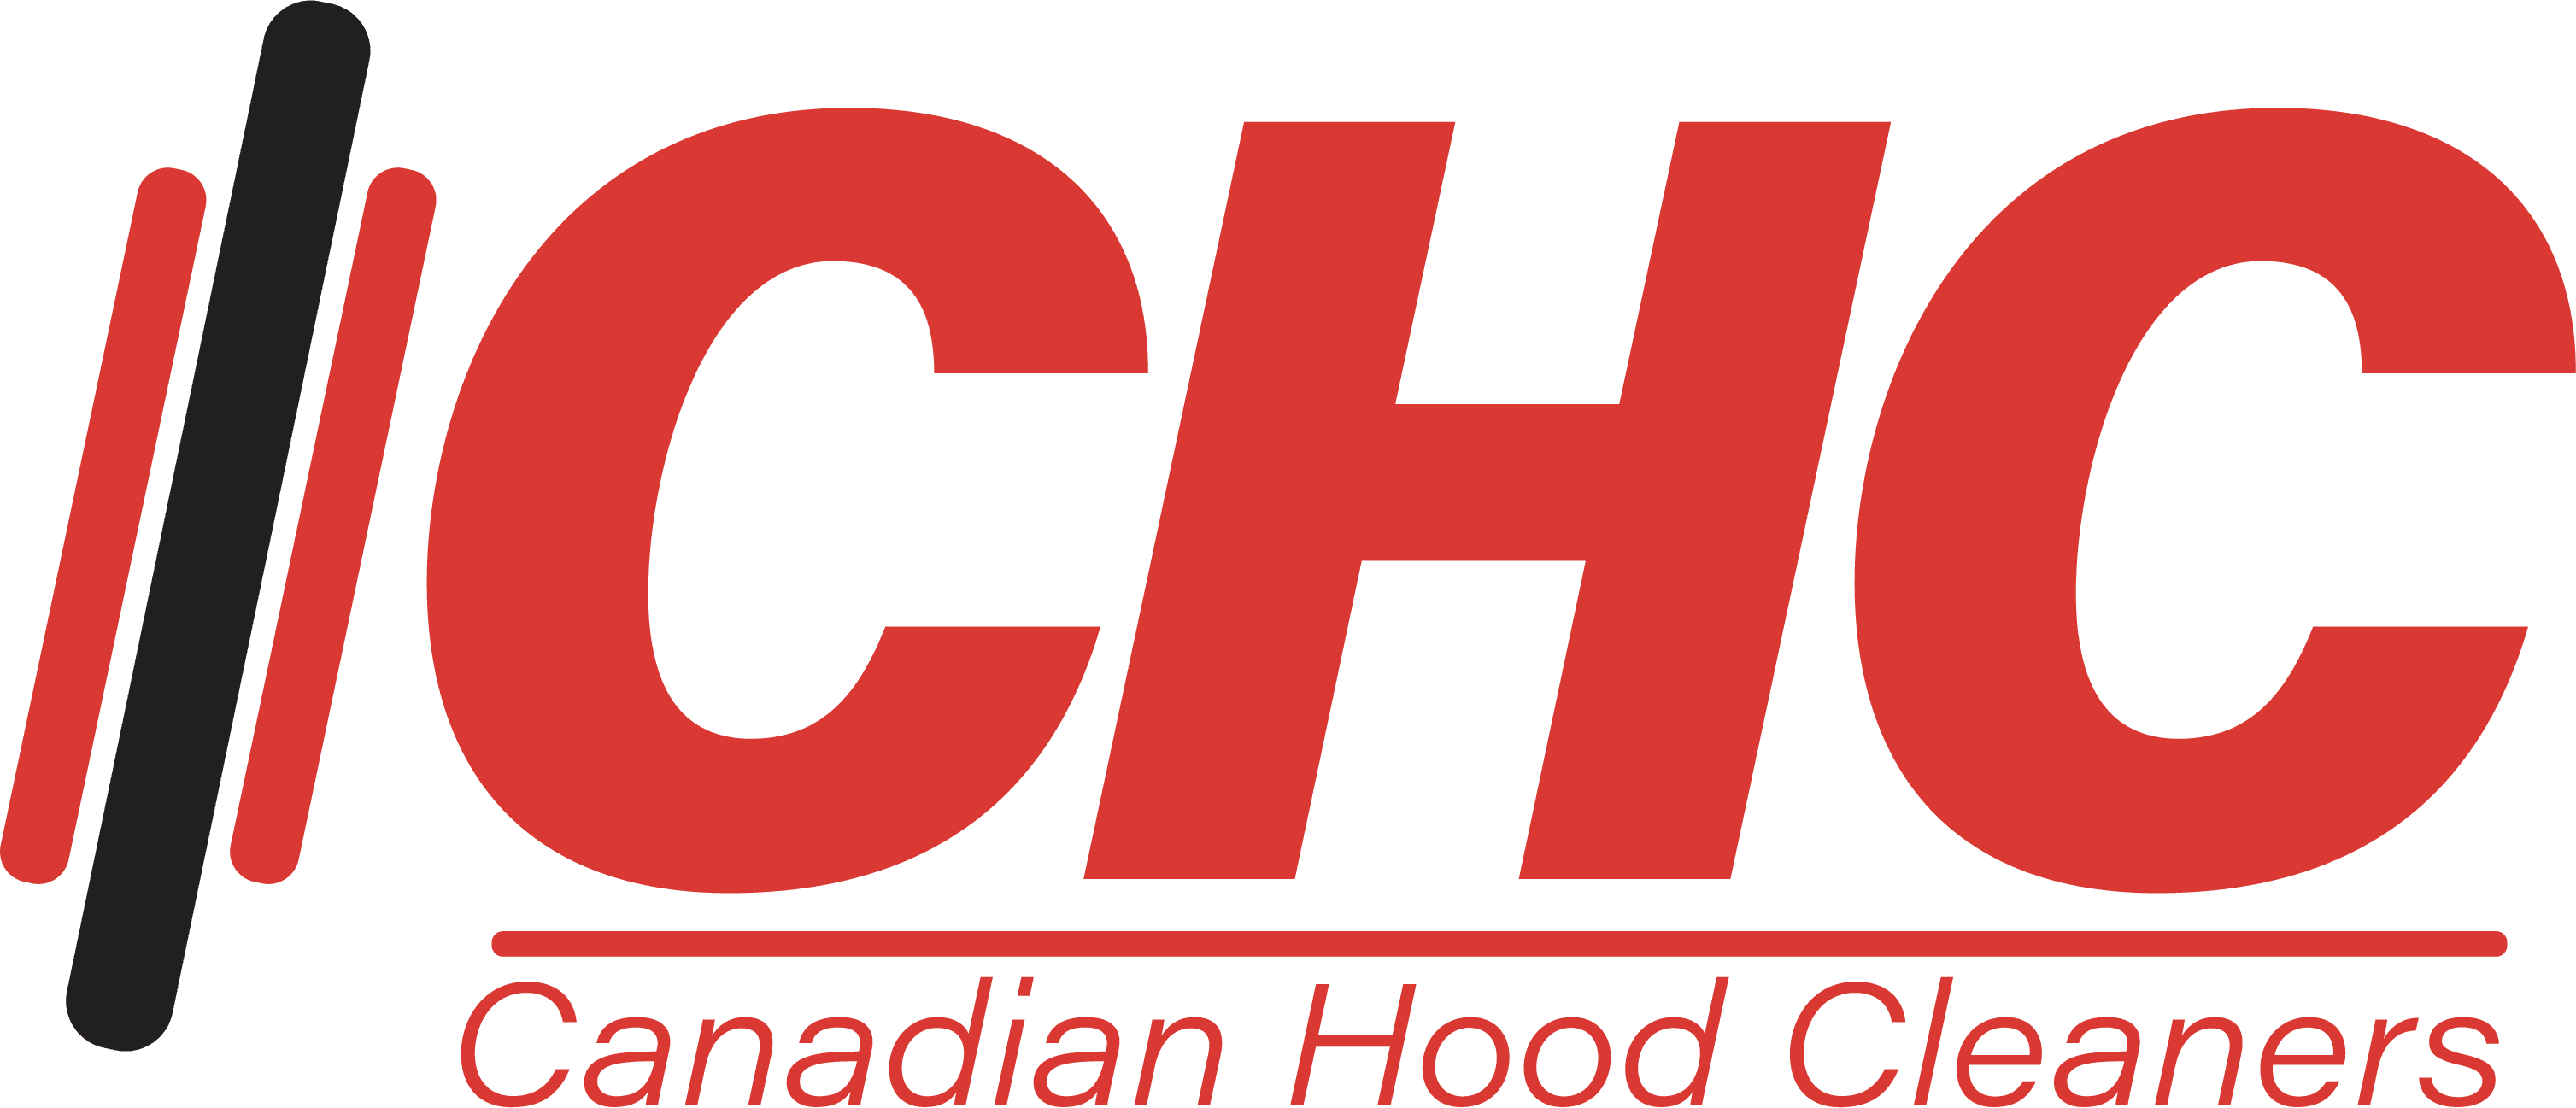 Canadian Hood Cleaners